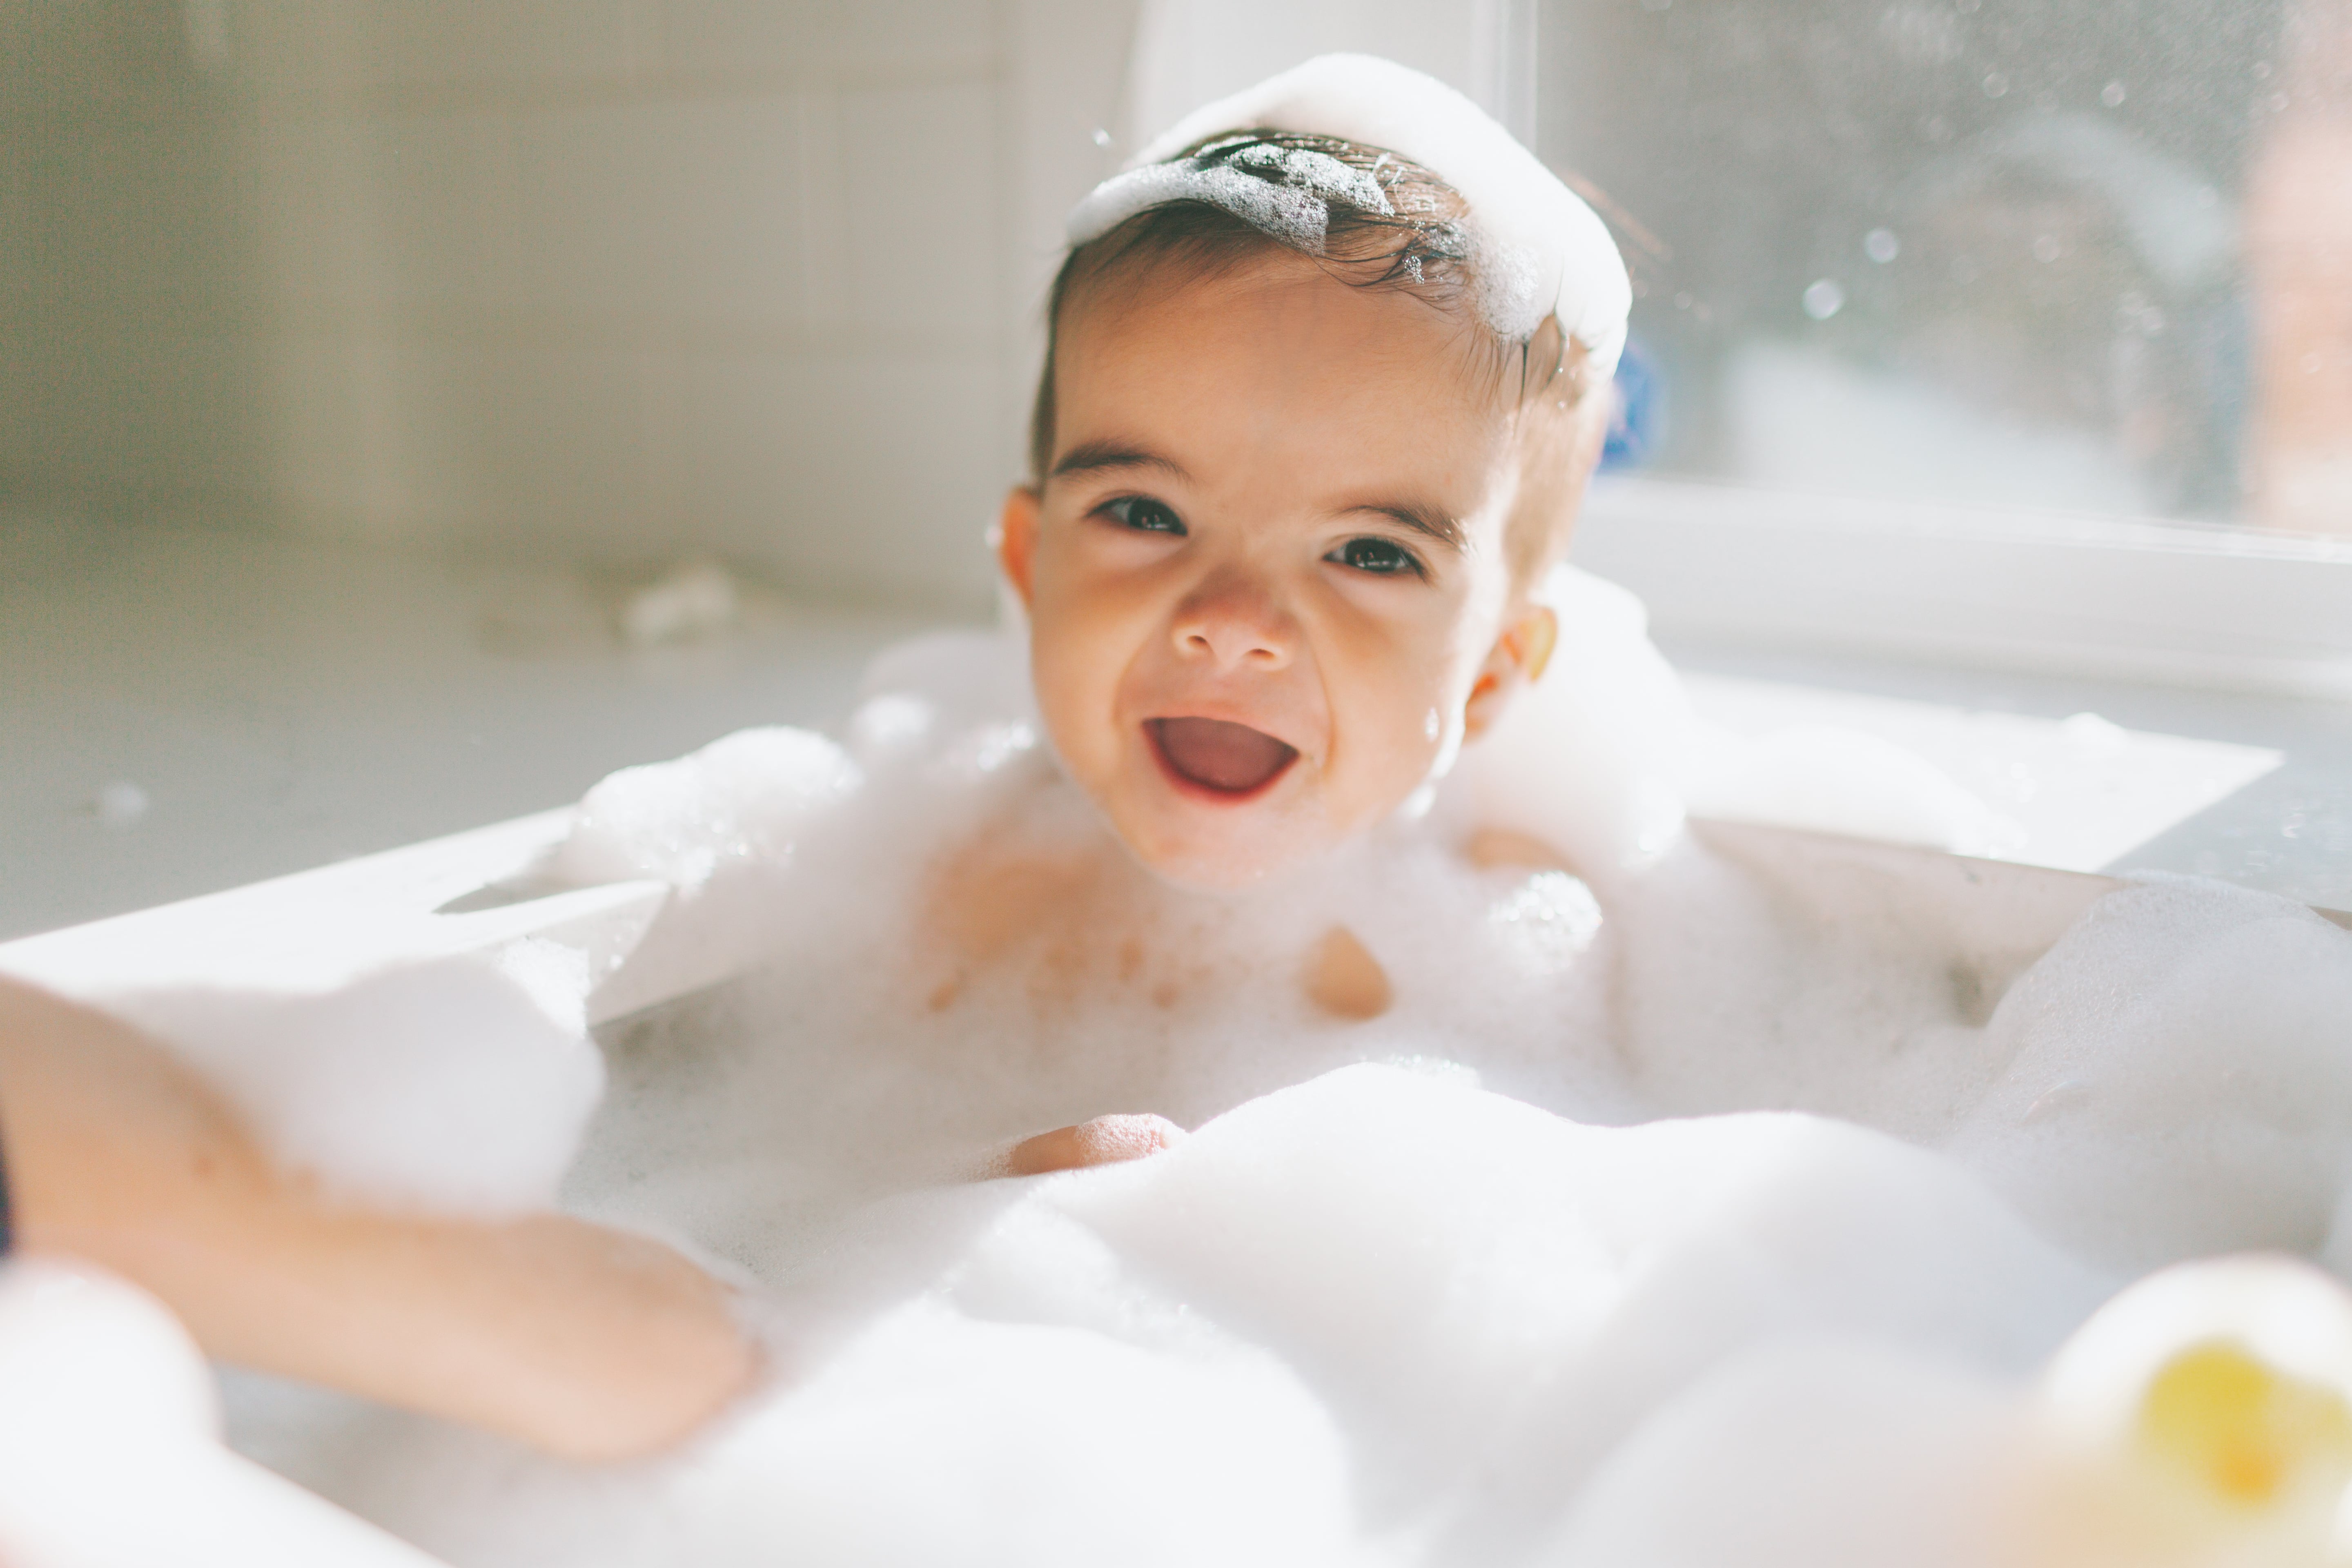 What Is The Point Of A Bubble Bath? We Have Answers.